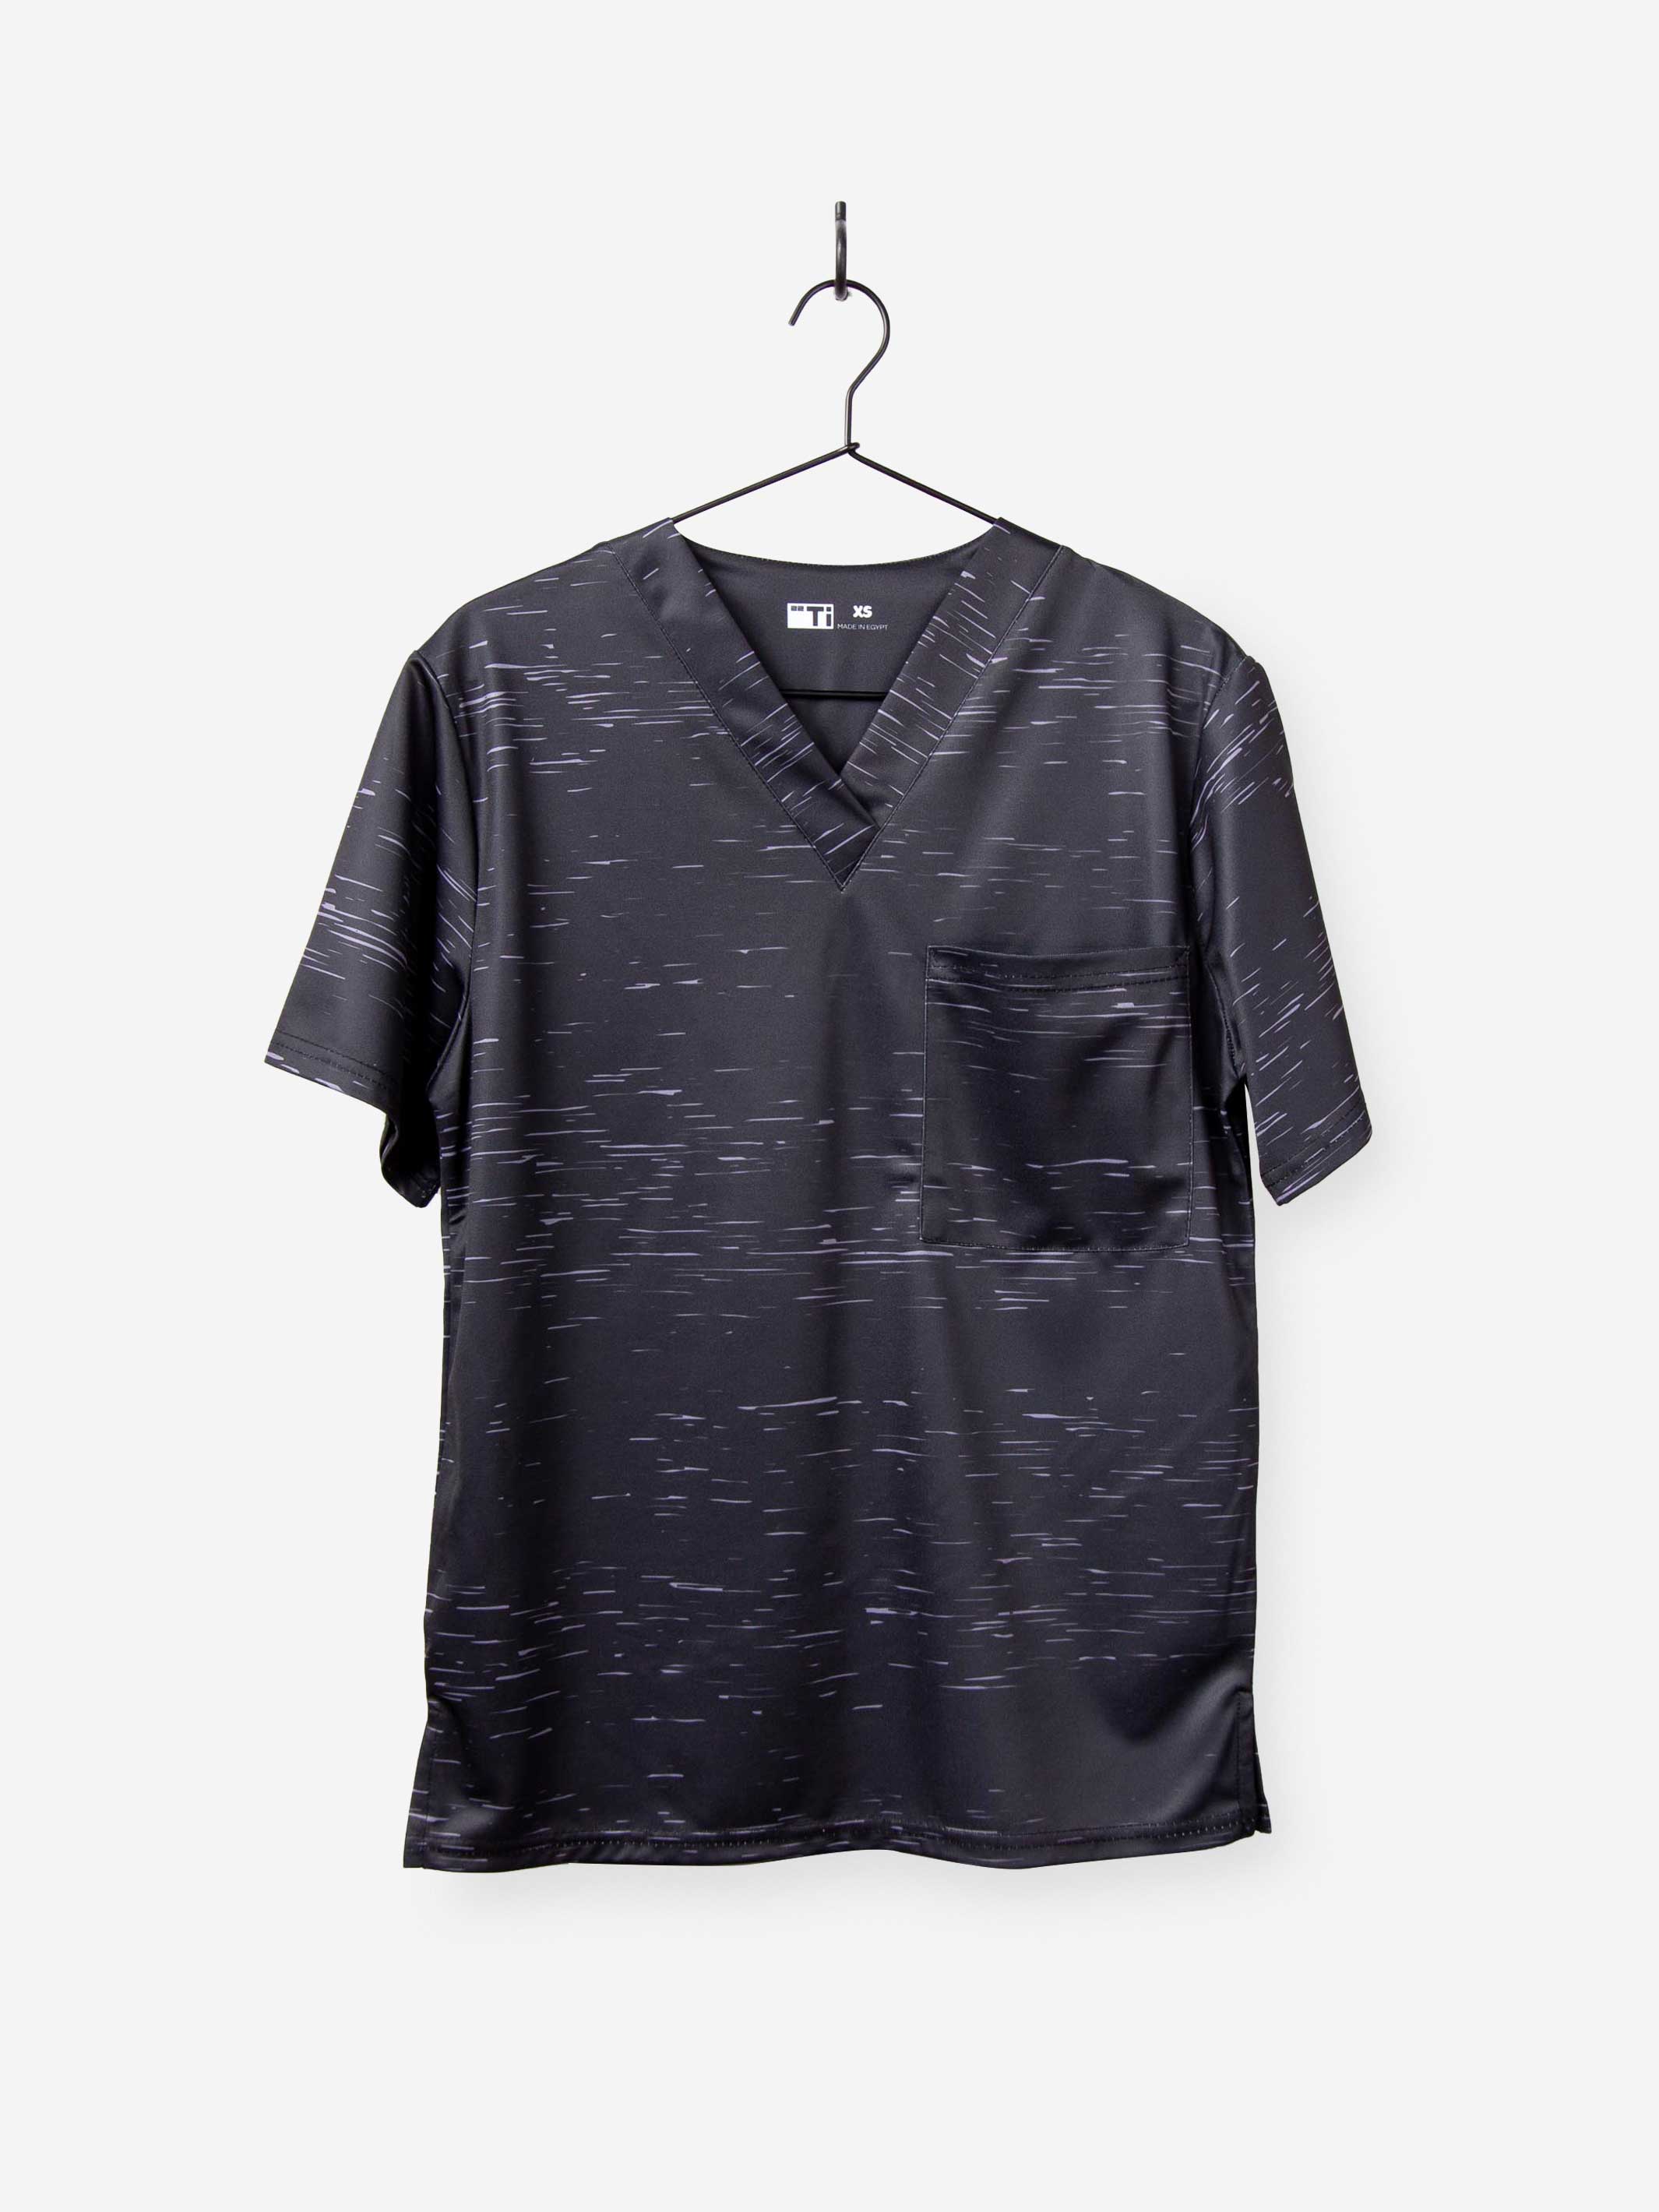 Men&#39;s Cool Print Scrub Top with Athletic Stripes and Static in Black with Chest Pocket